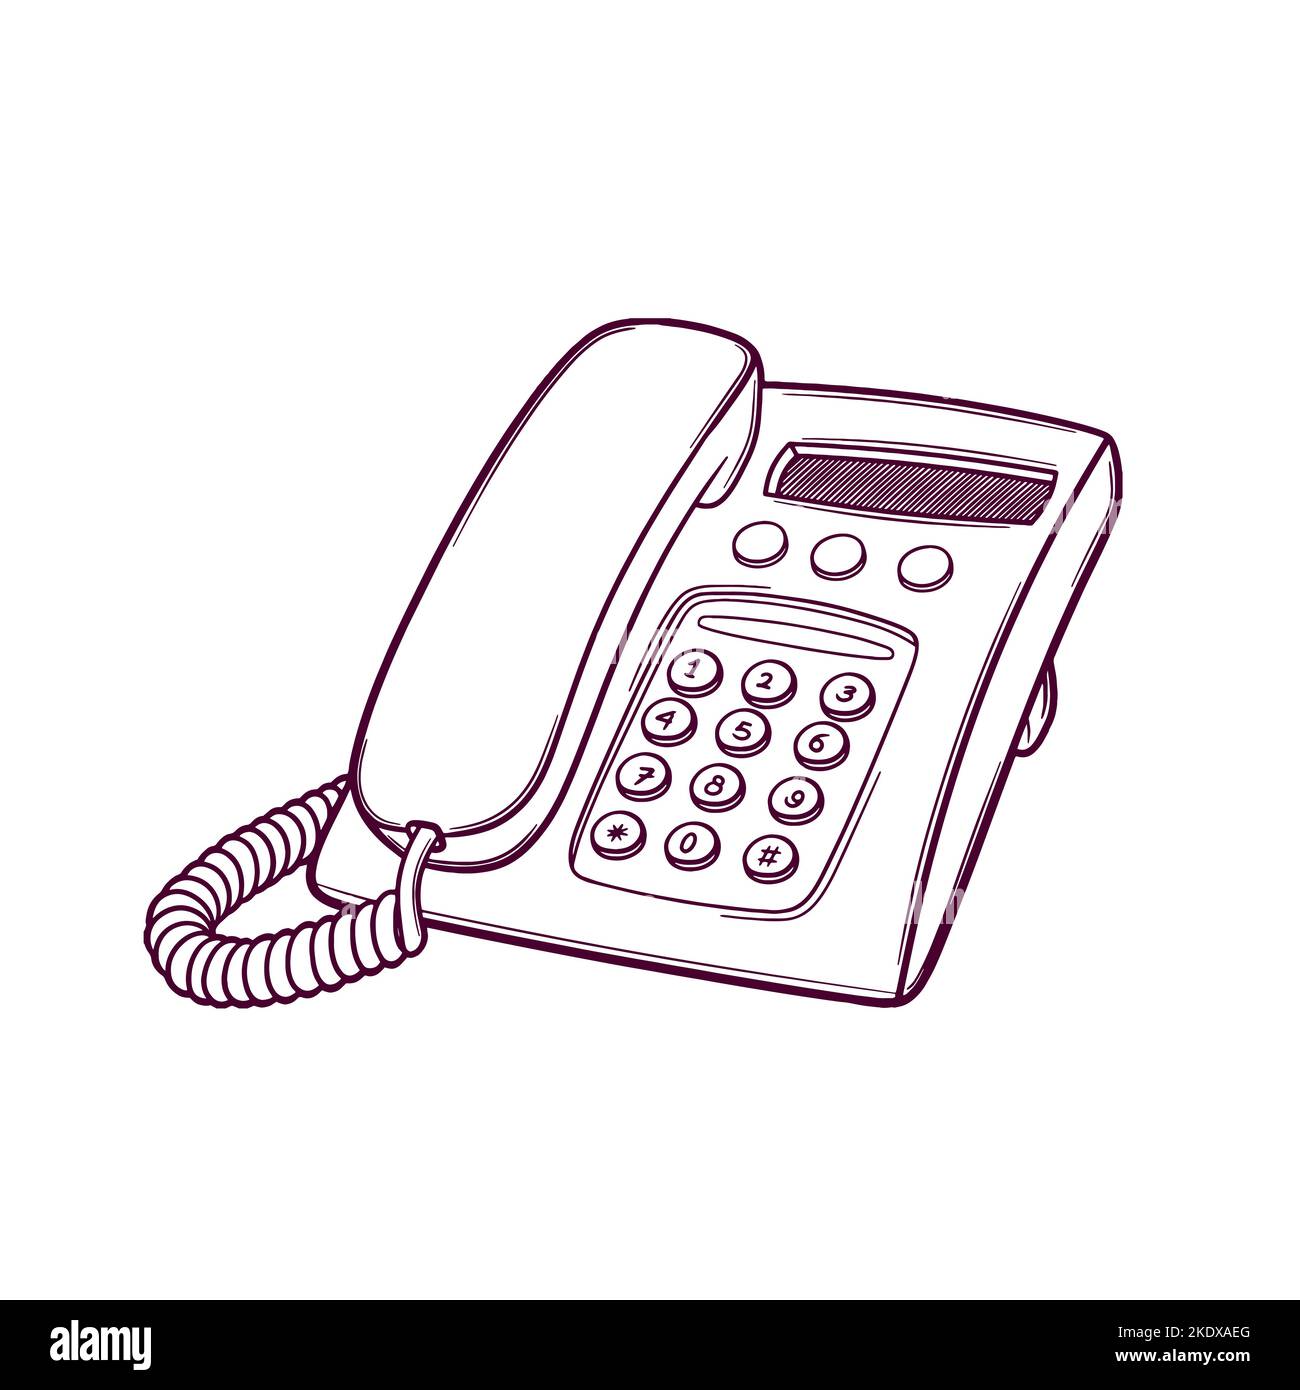 hand drawn telephone doodle illustration Stock Vector